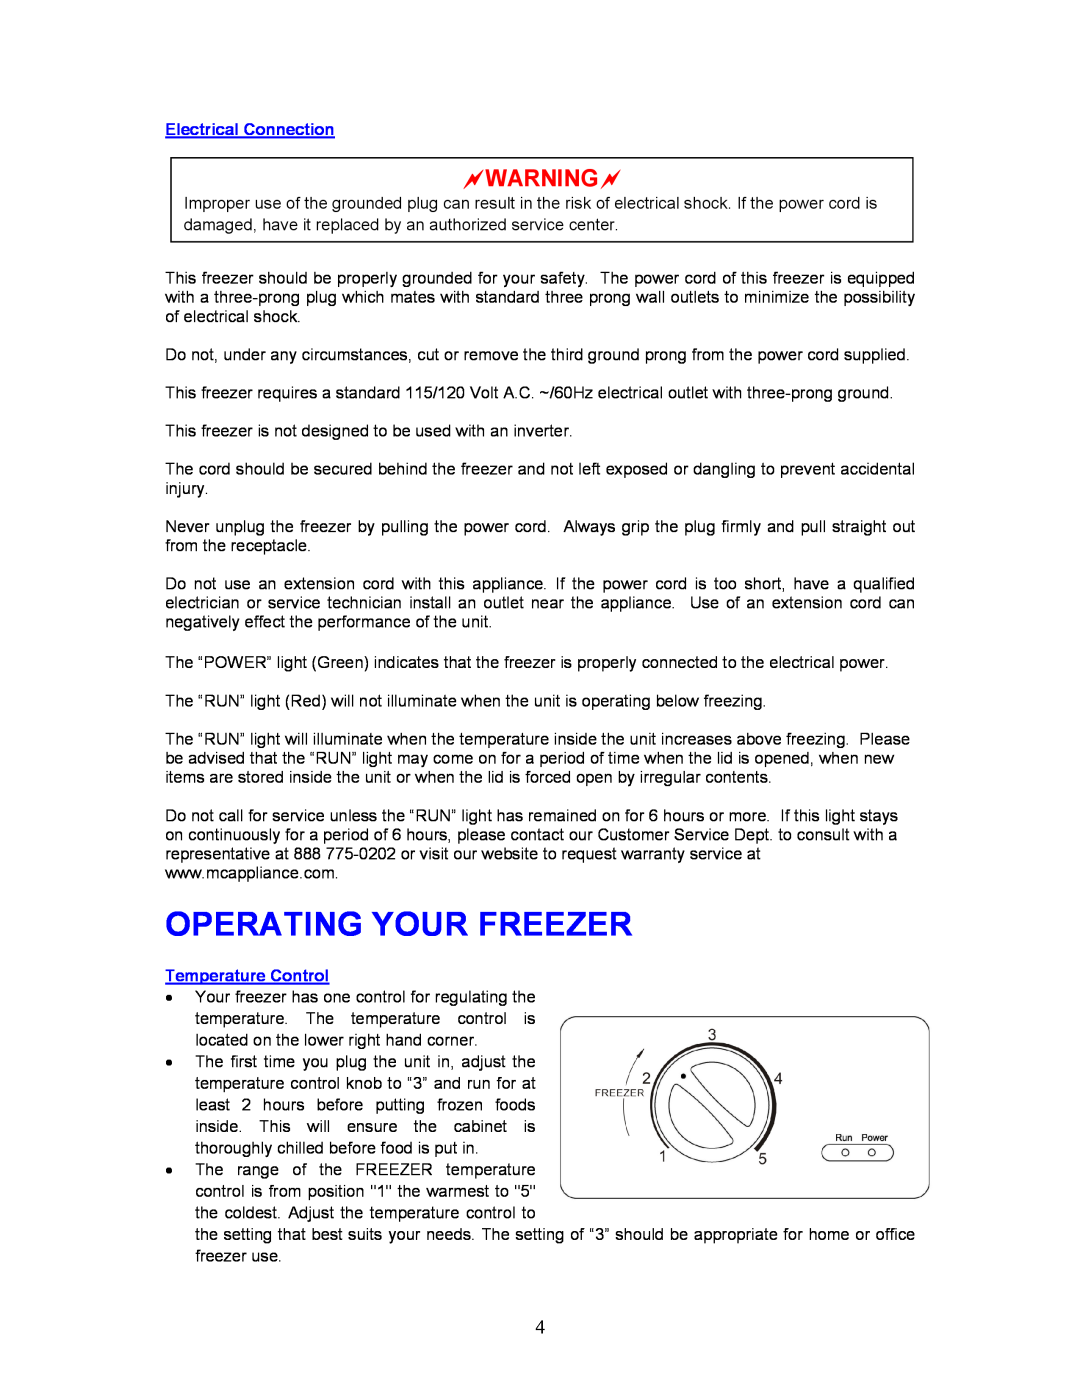 Magic Chef MCCF35WBX instruction manual Operating Your Freezer, Electrical Connection, Temperature Control 